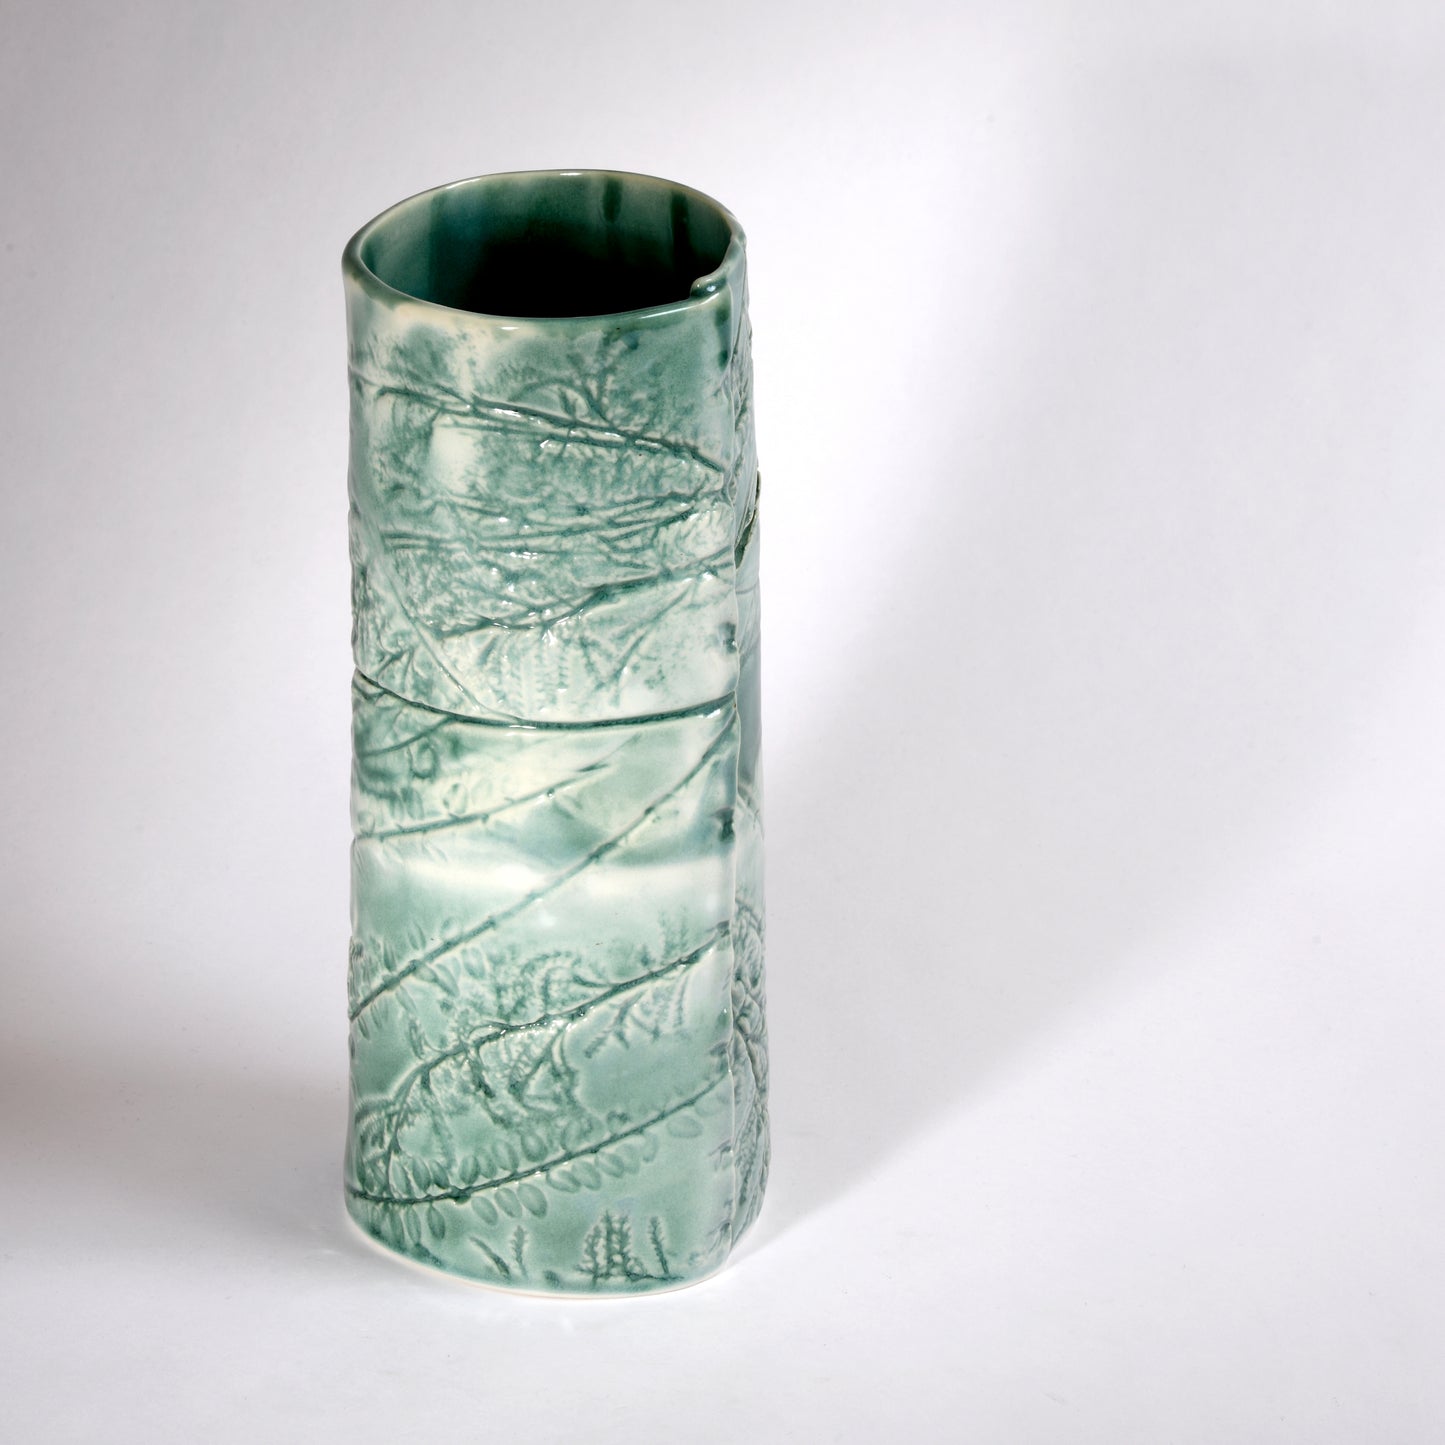 A very slightly leaning vase with an organic "windswept" design in a beautiful aqua glaze